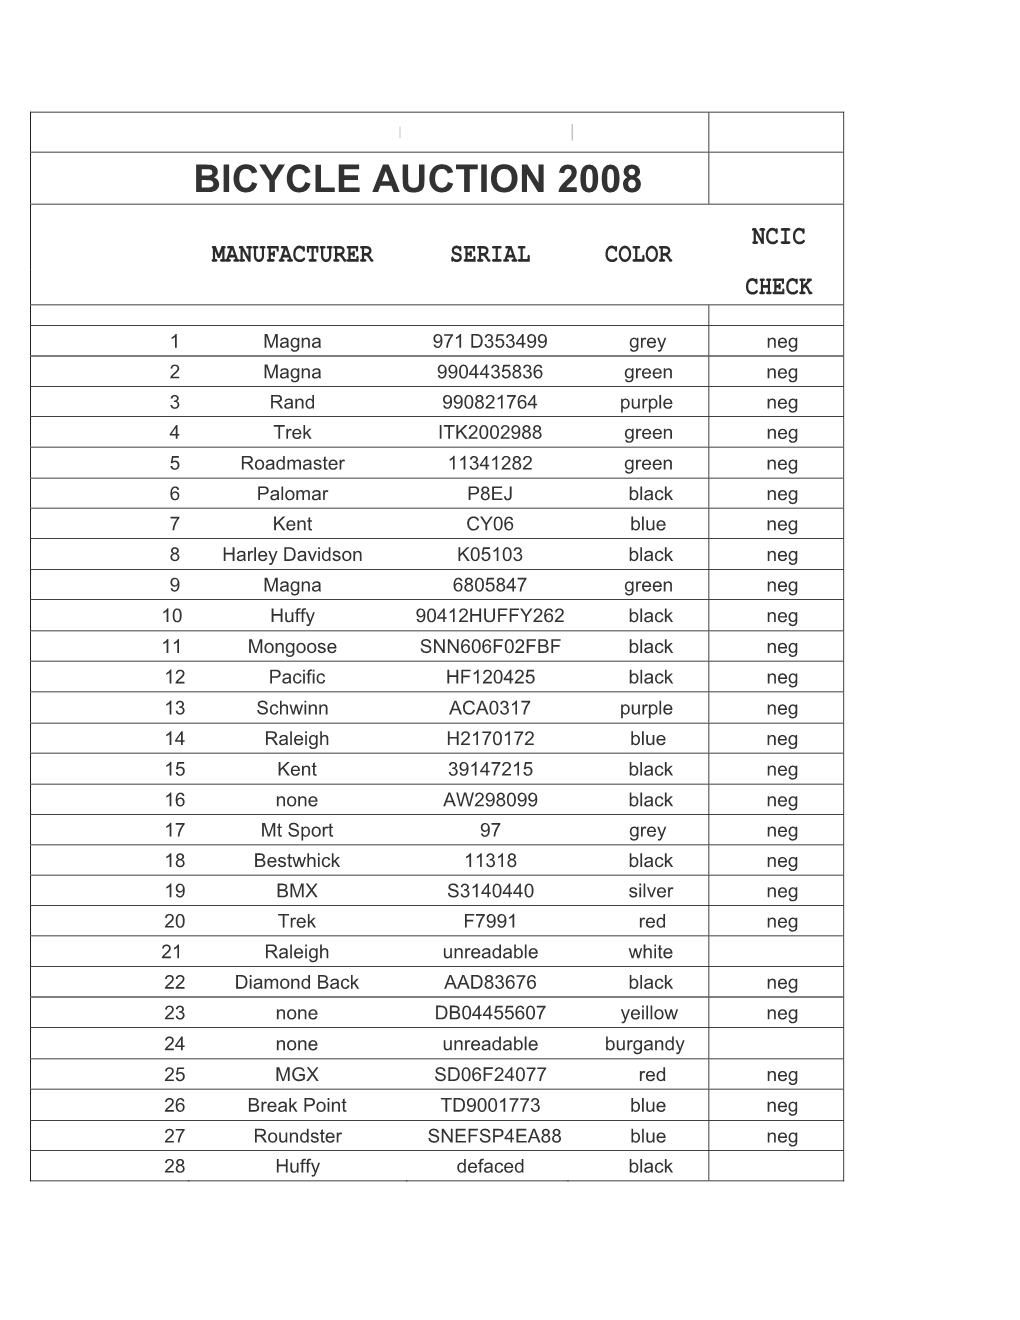 Auction Book Download